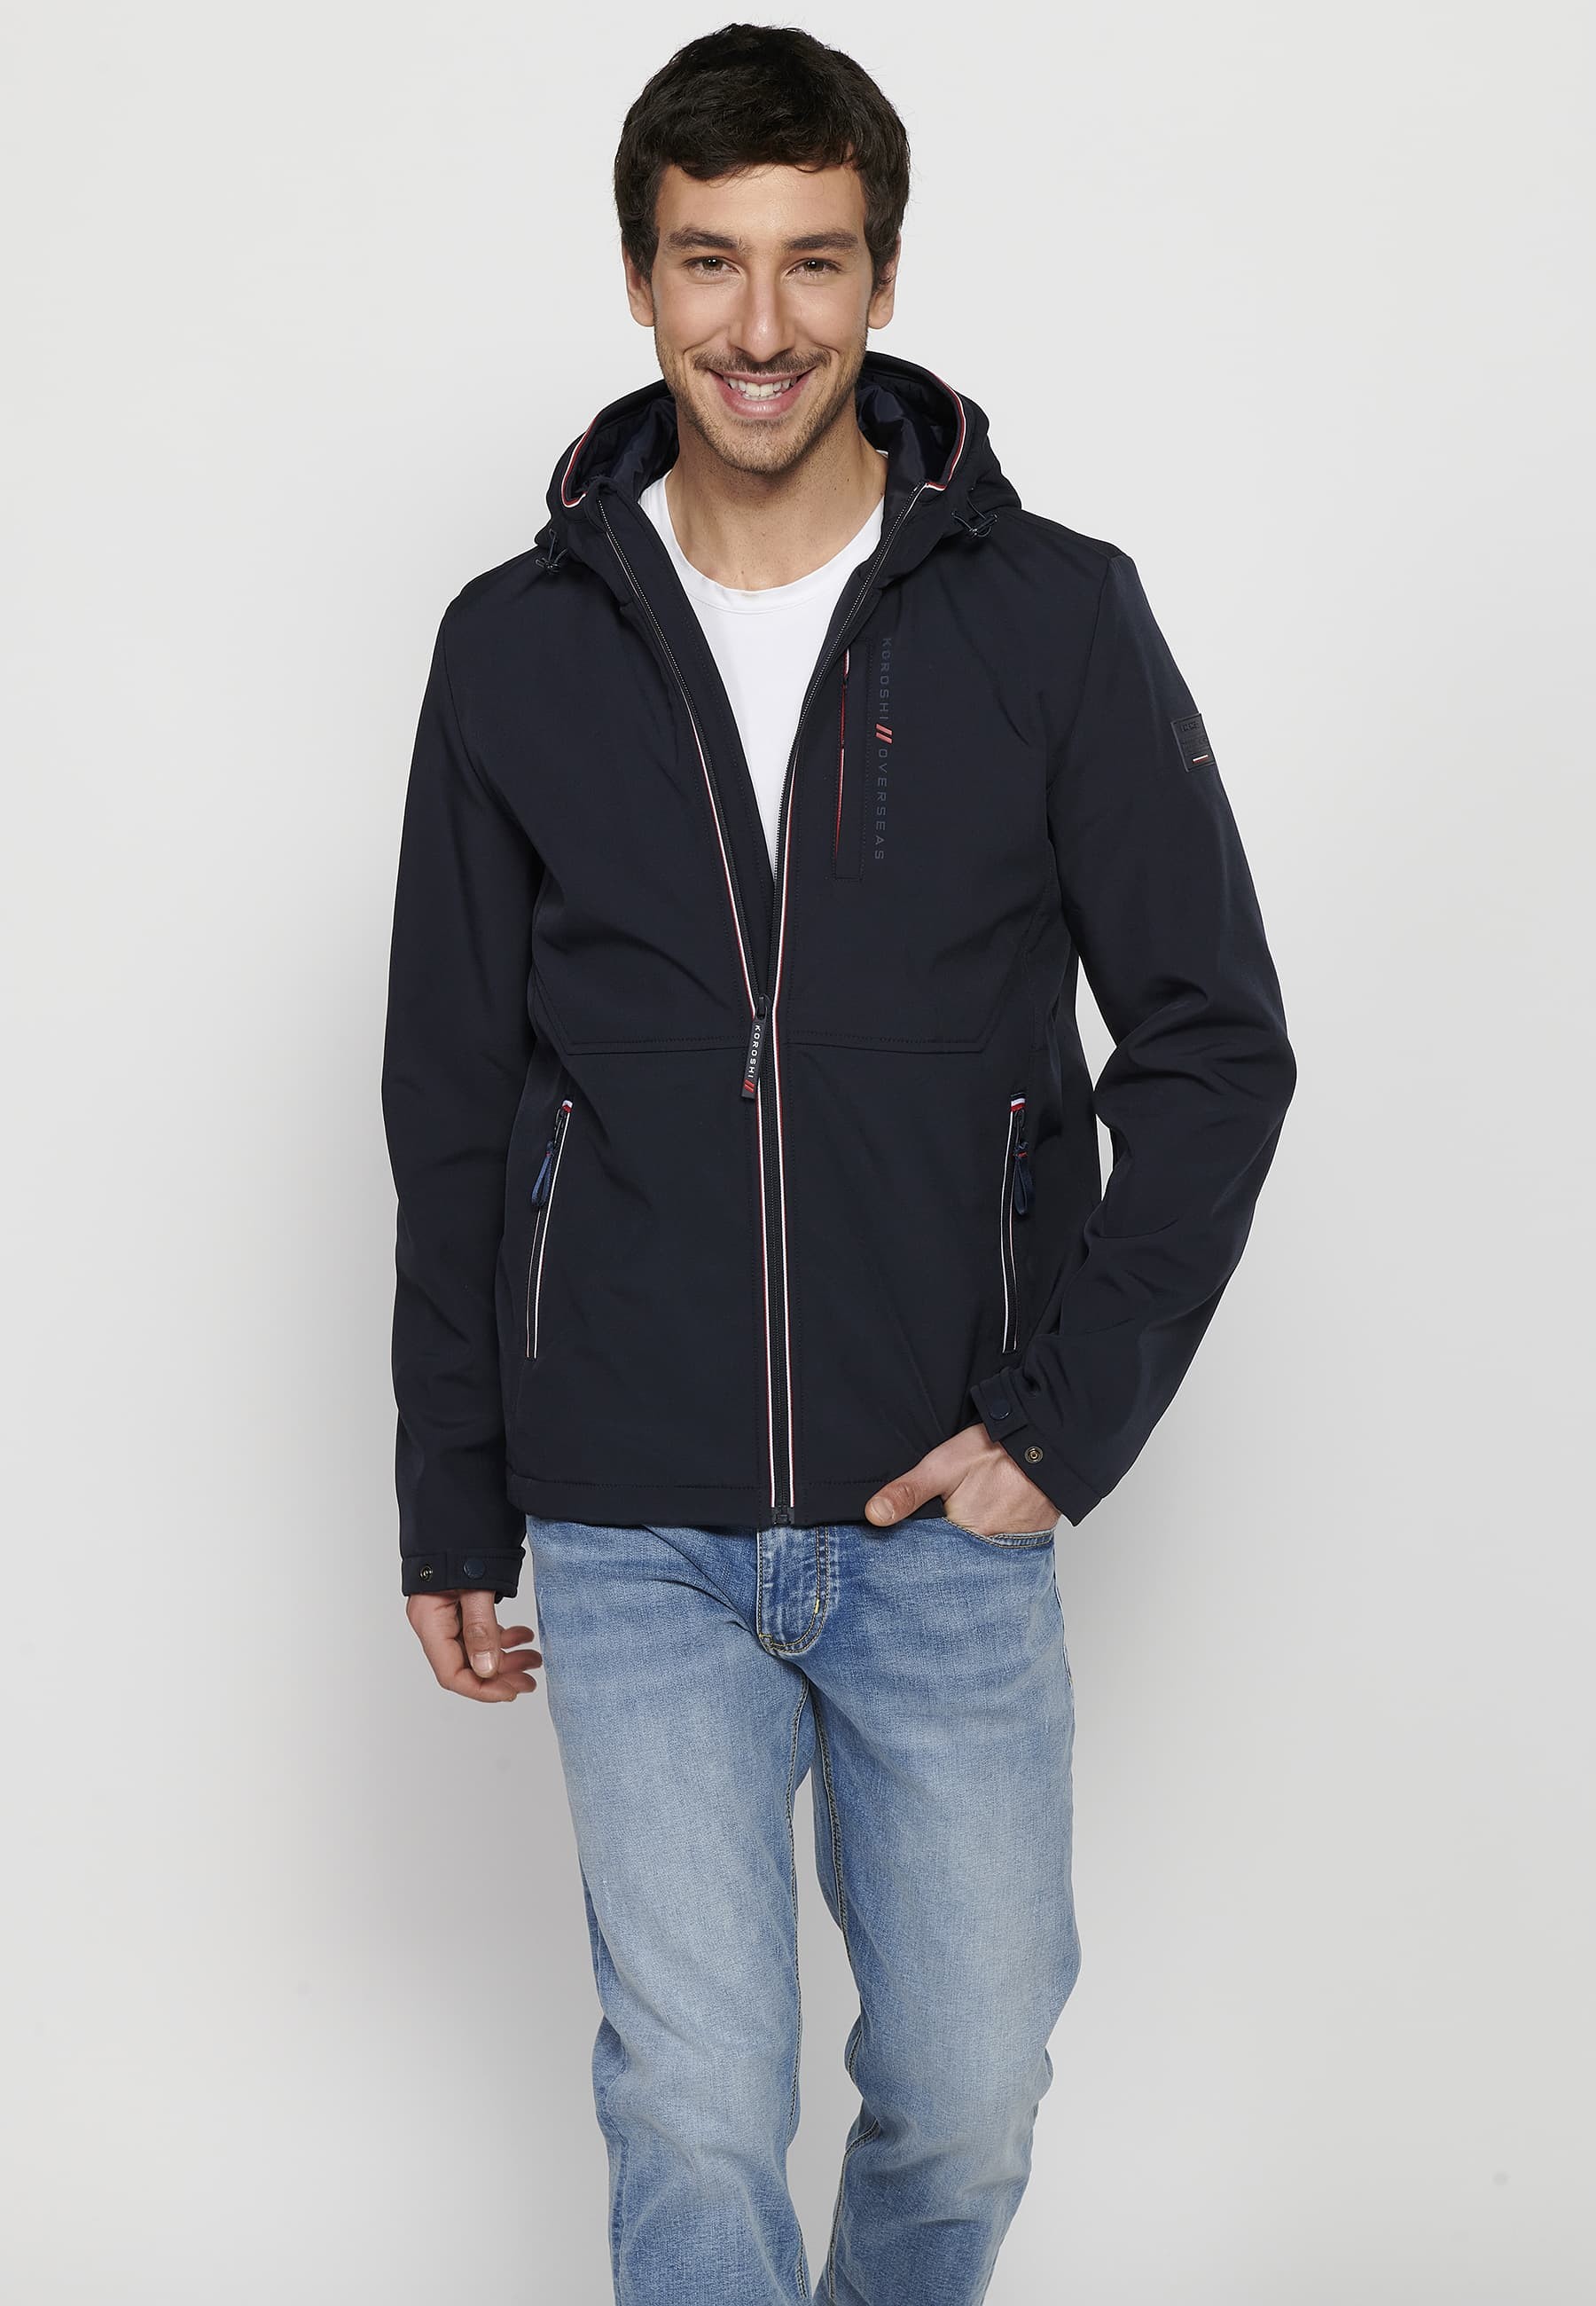 Navy Long Sleeve Jacket with Hooded Collar and Front Zipper Closure for Men